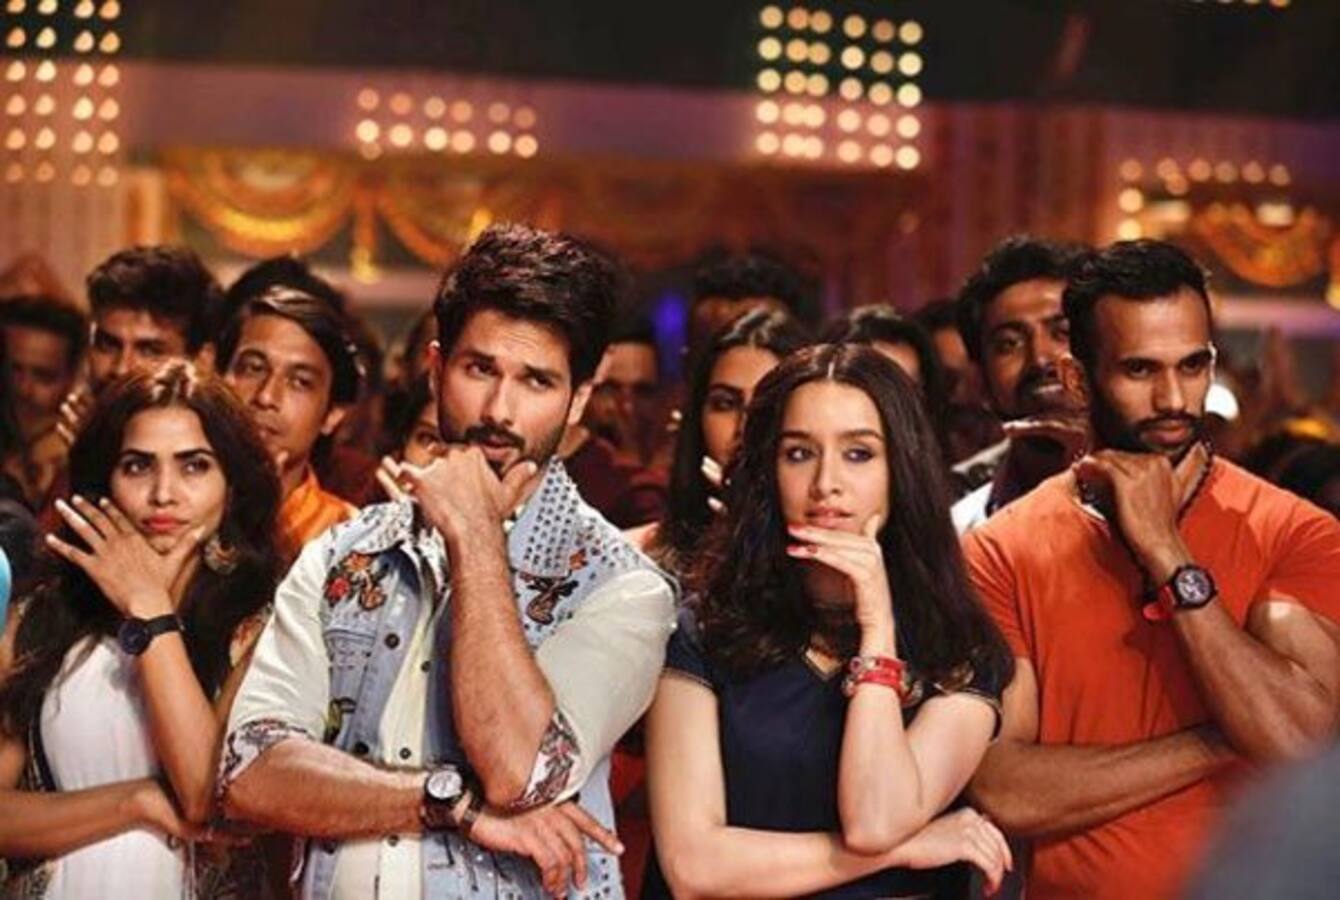 Batti Gul Meter Chalu box office collections day 1: Shahid-Shraddha Kapoor's film opens on a decent note; earns Rs 6.76 crore